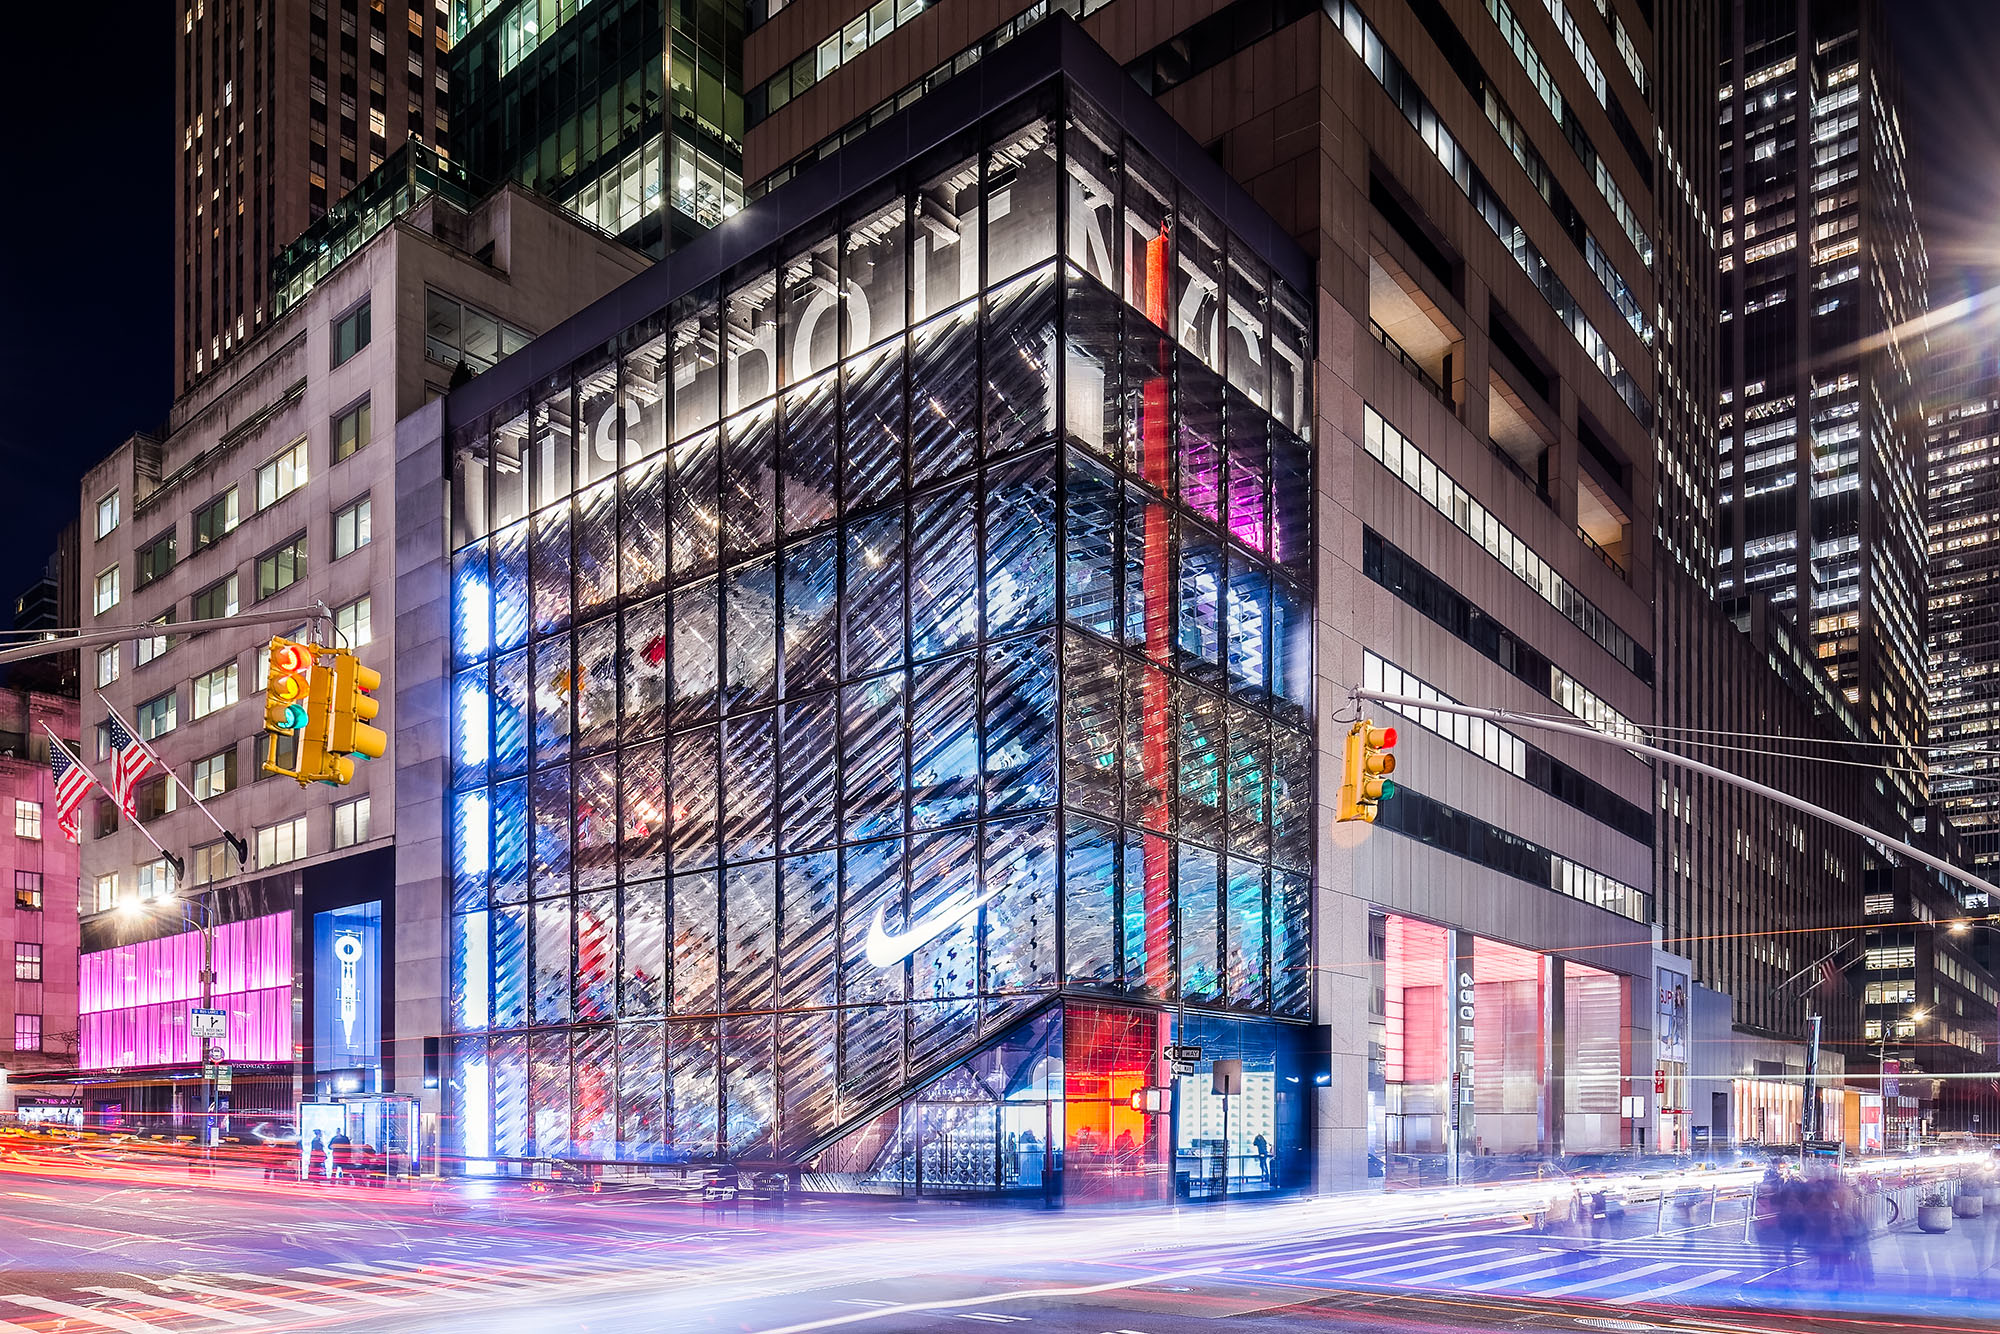 Nike opens House of Innovation flagship in New York City